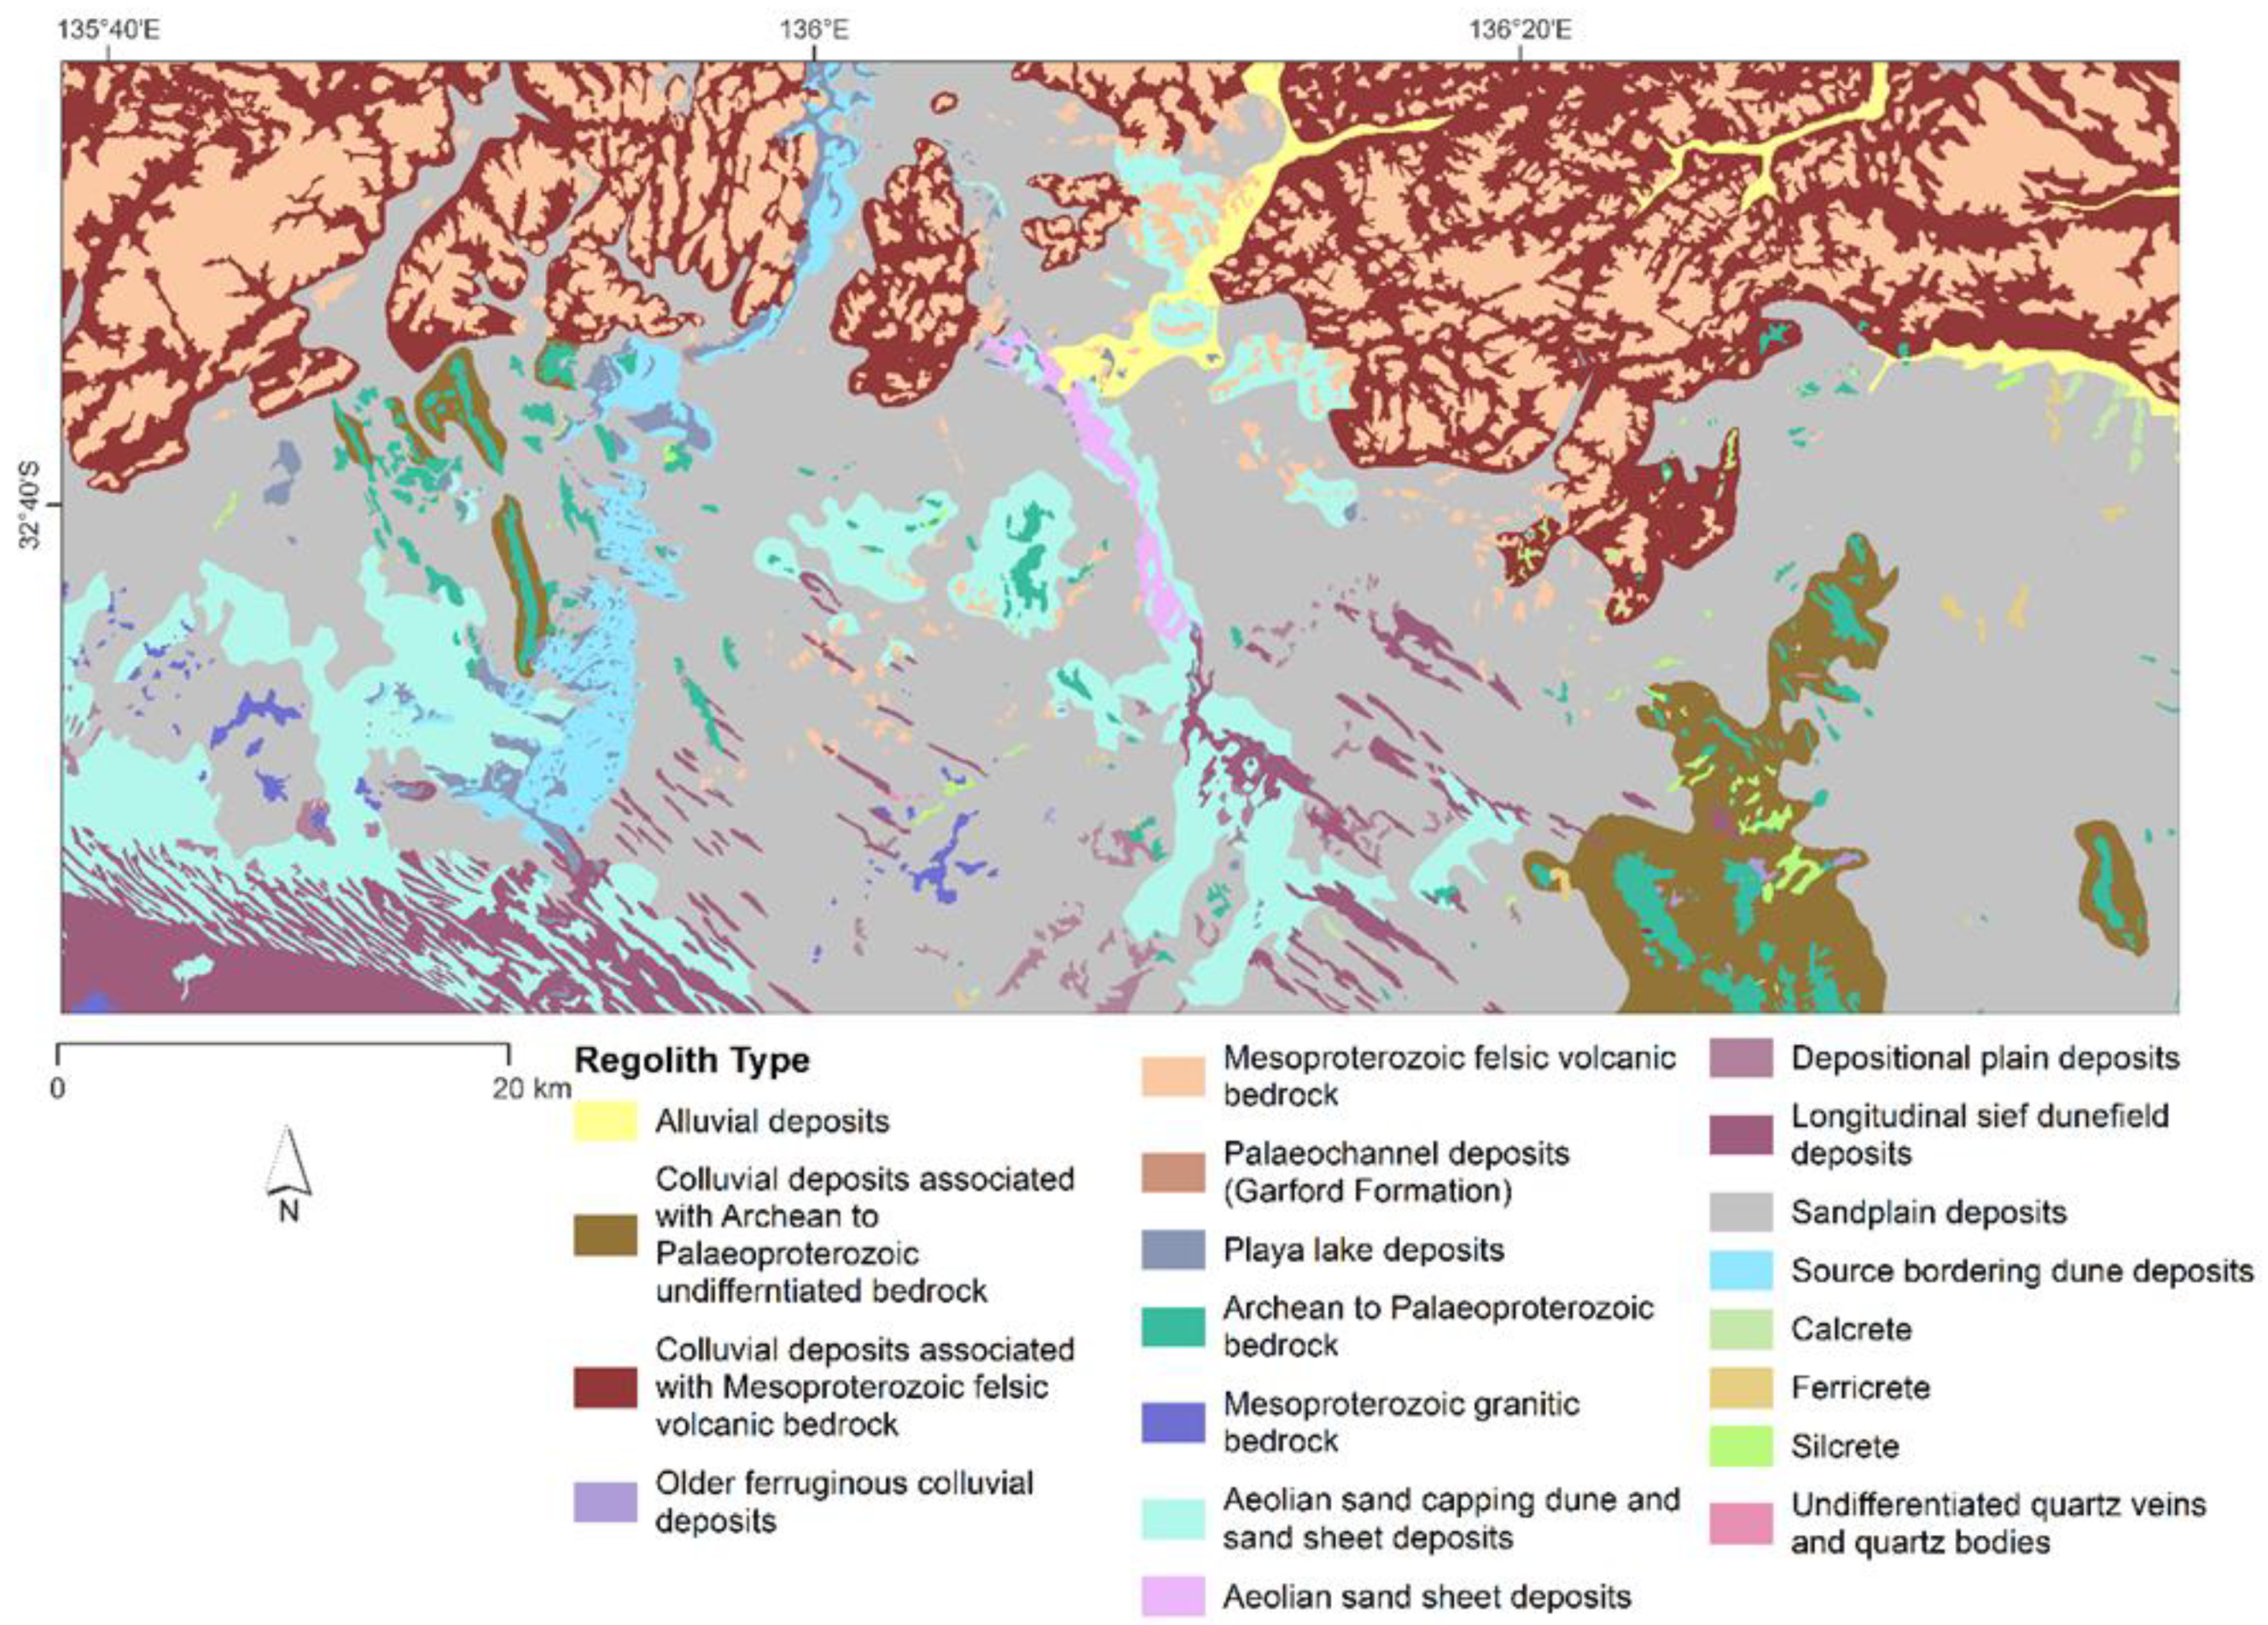 Geosciences Free Full Text Objective Regolith Landform Mapping In A Regolith Dominated 0656